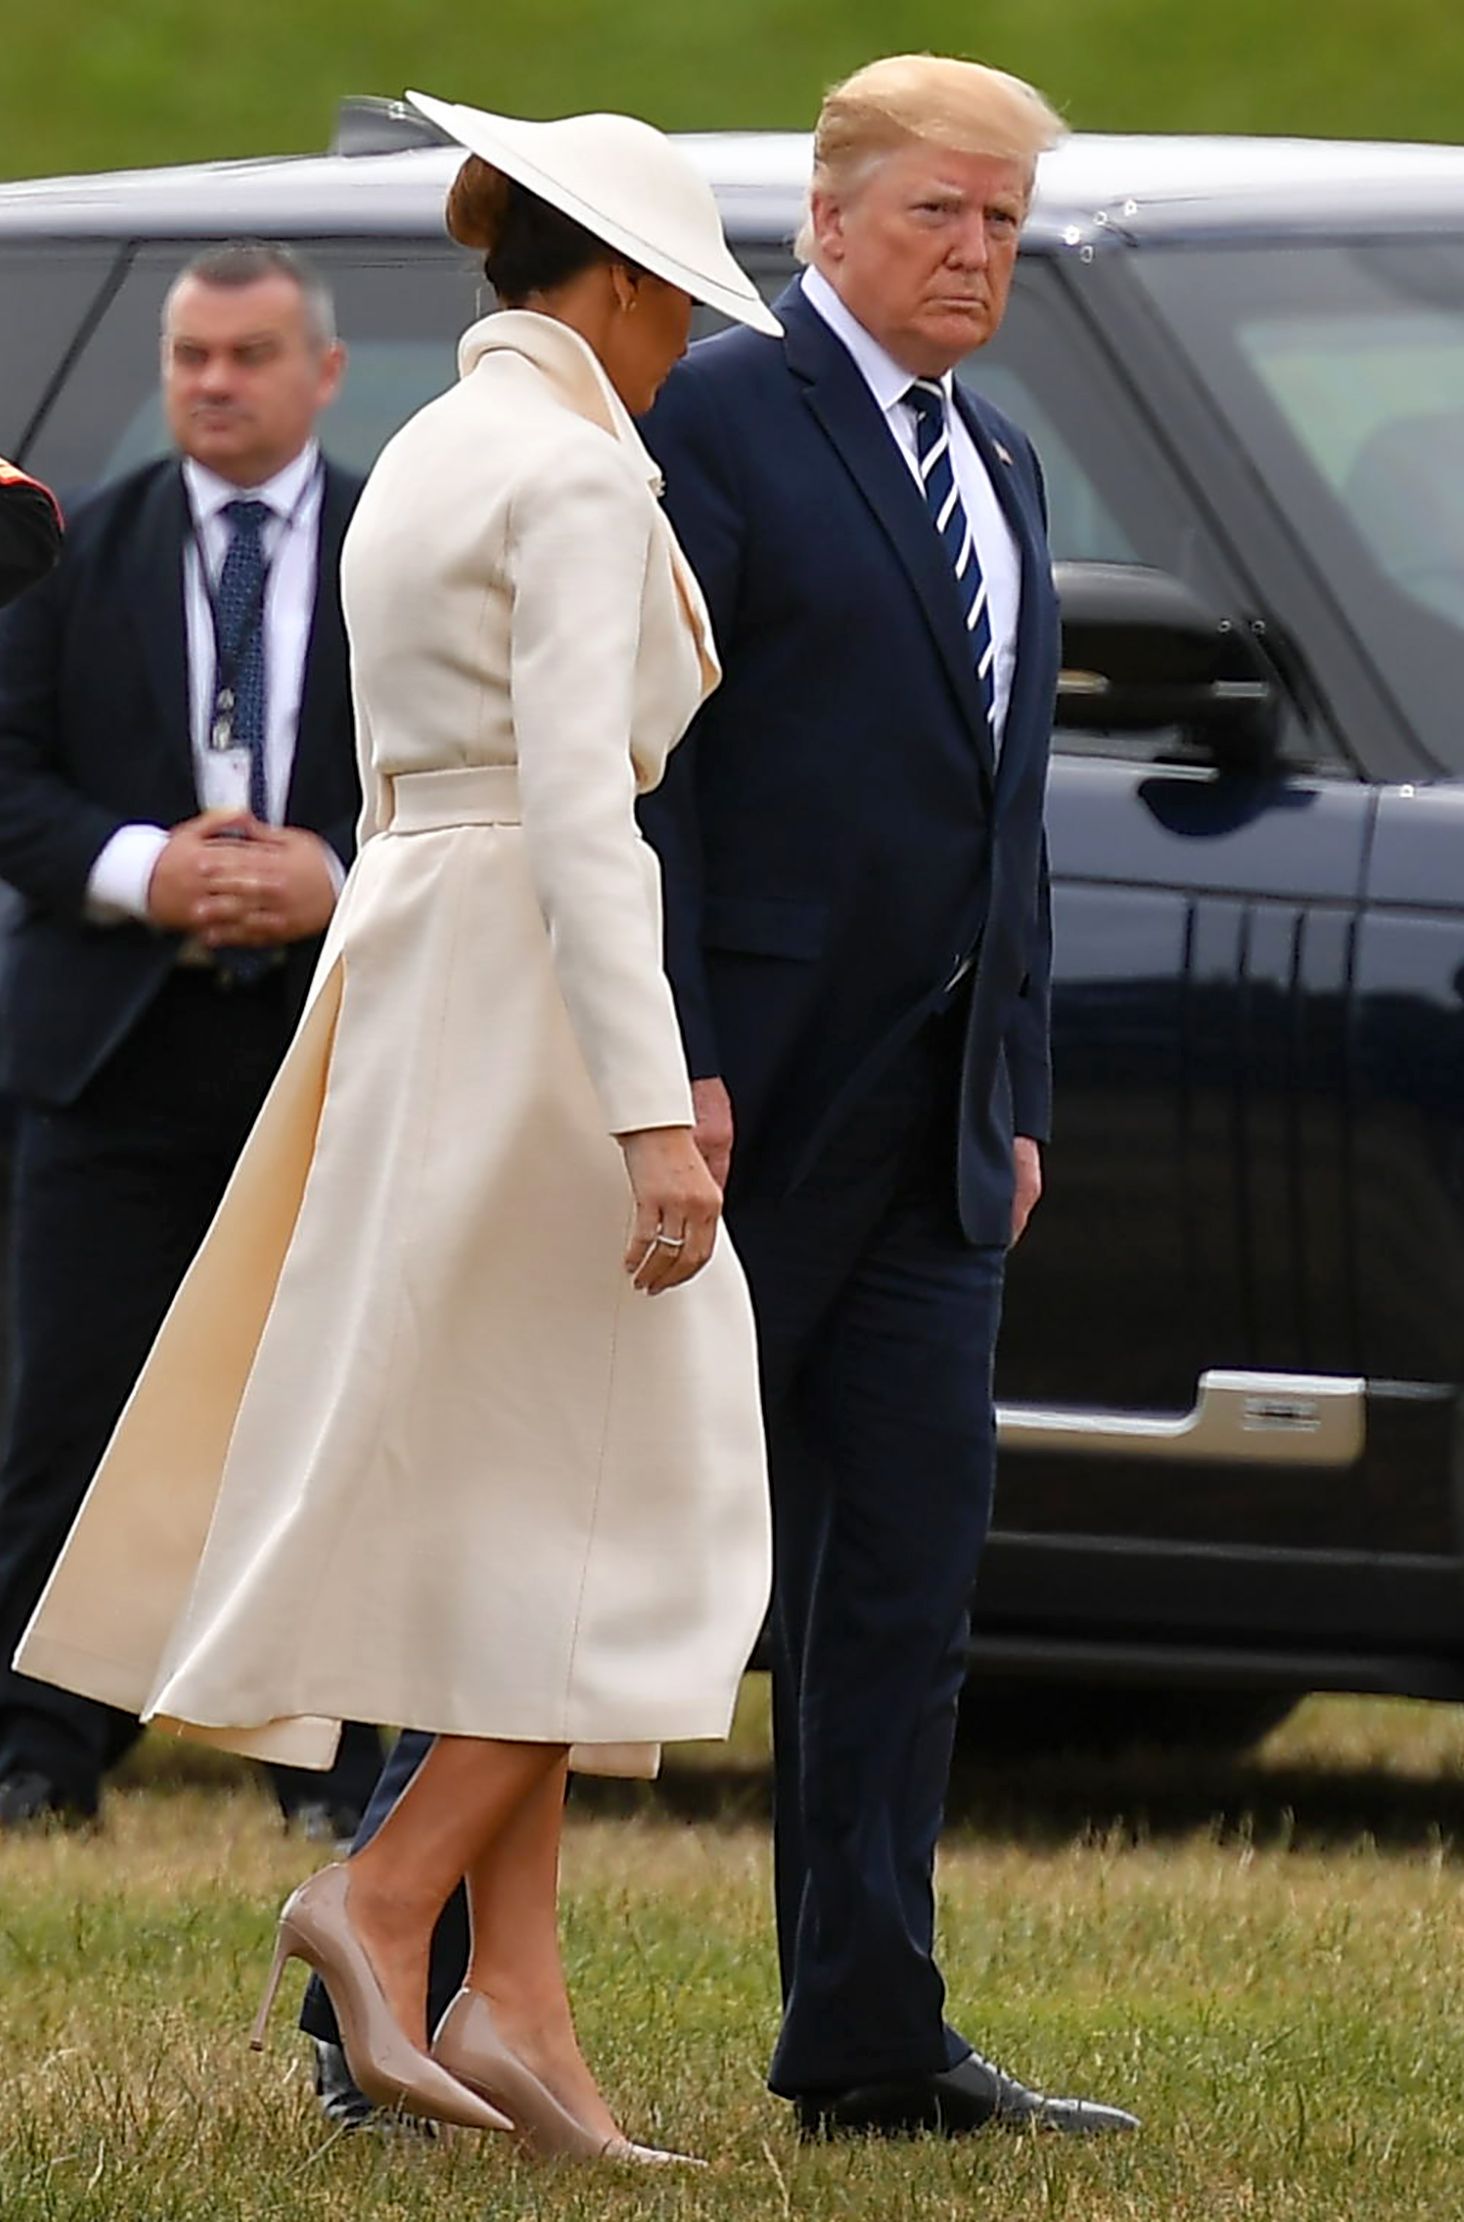 US President Donald Trump (R) and First Lady Melania Trump (C) walk to their vehicle after disembarking from the Marine One helicopter after arriving at Southsea Castle.